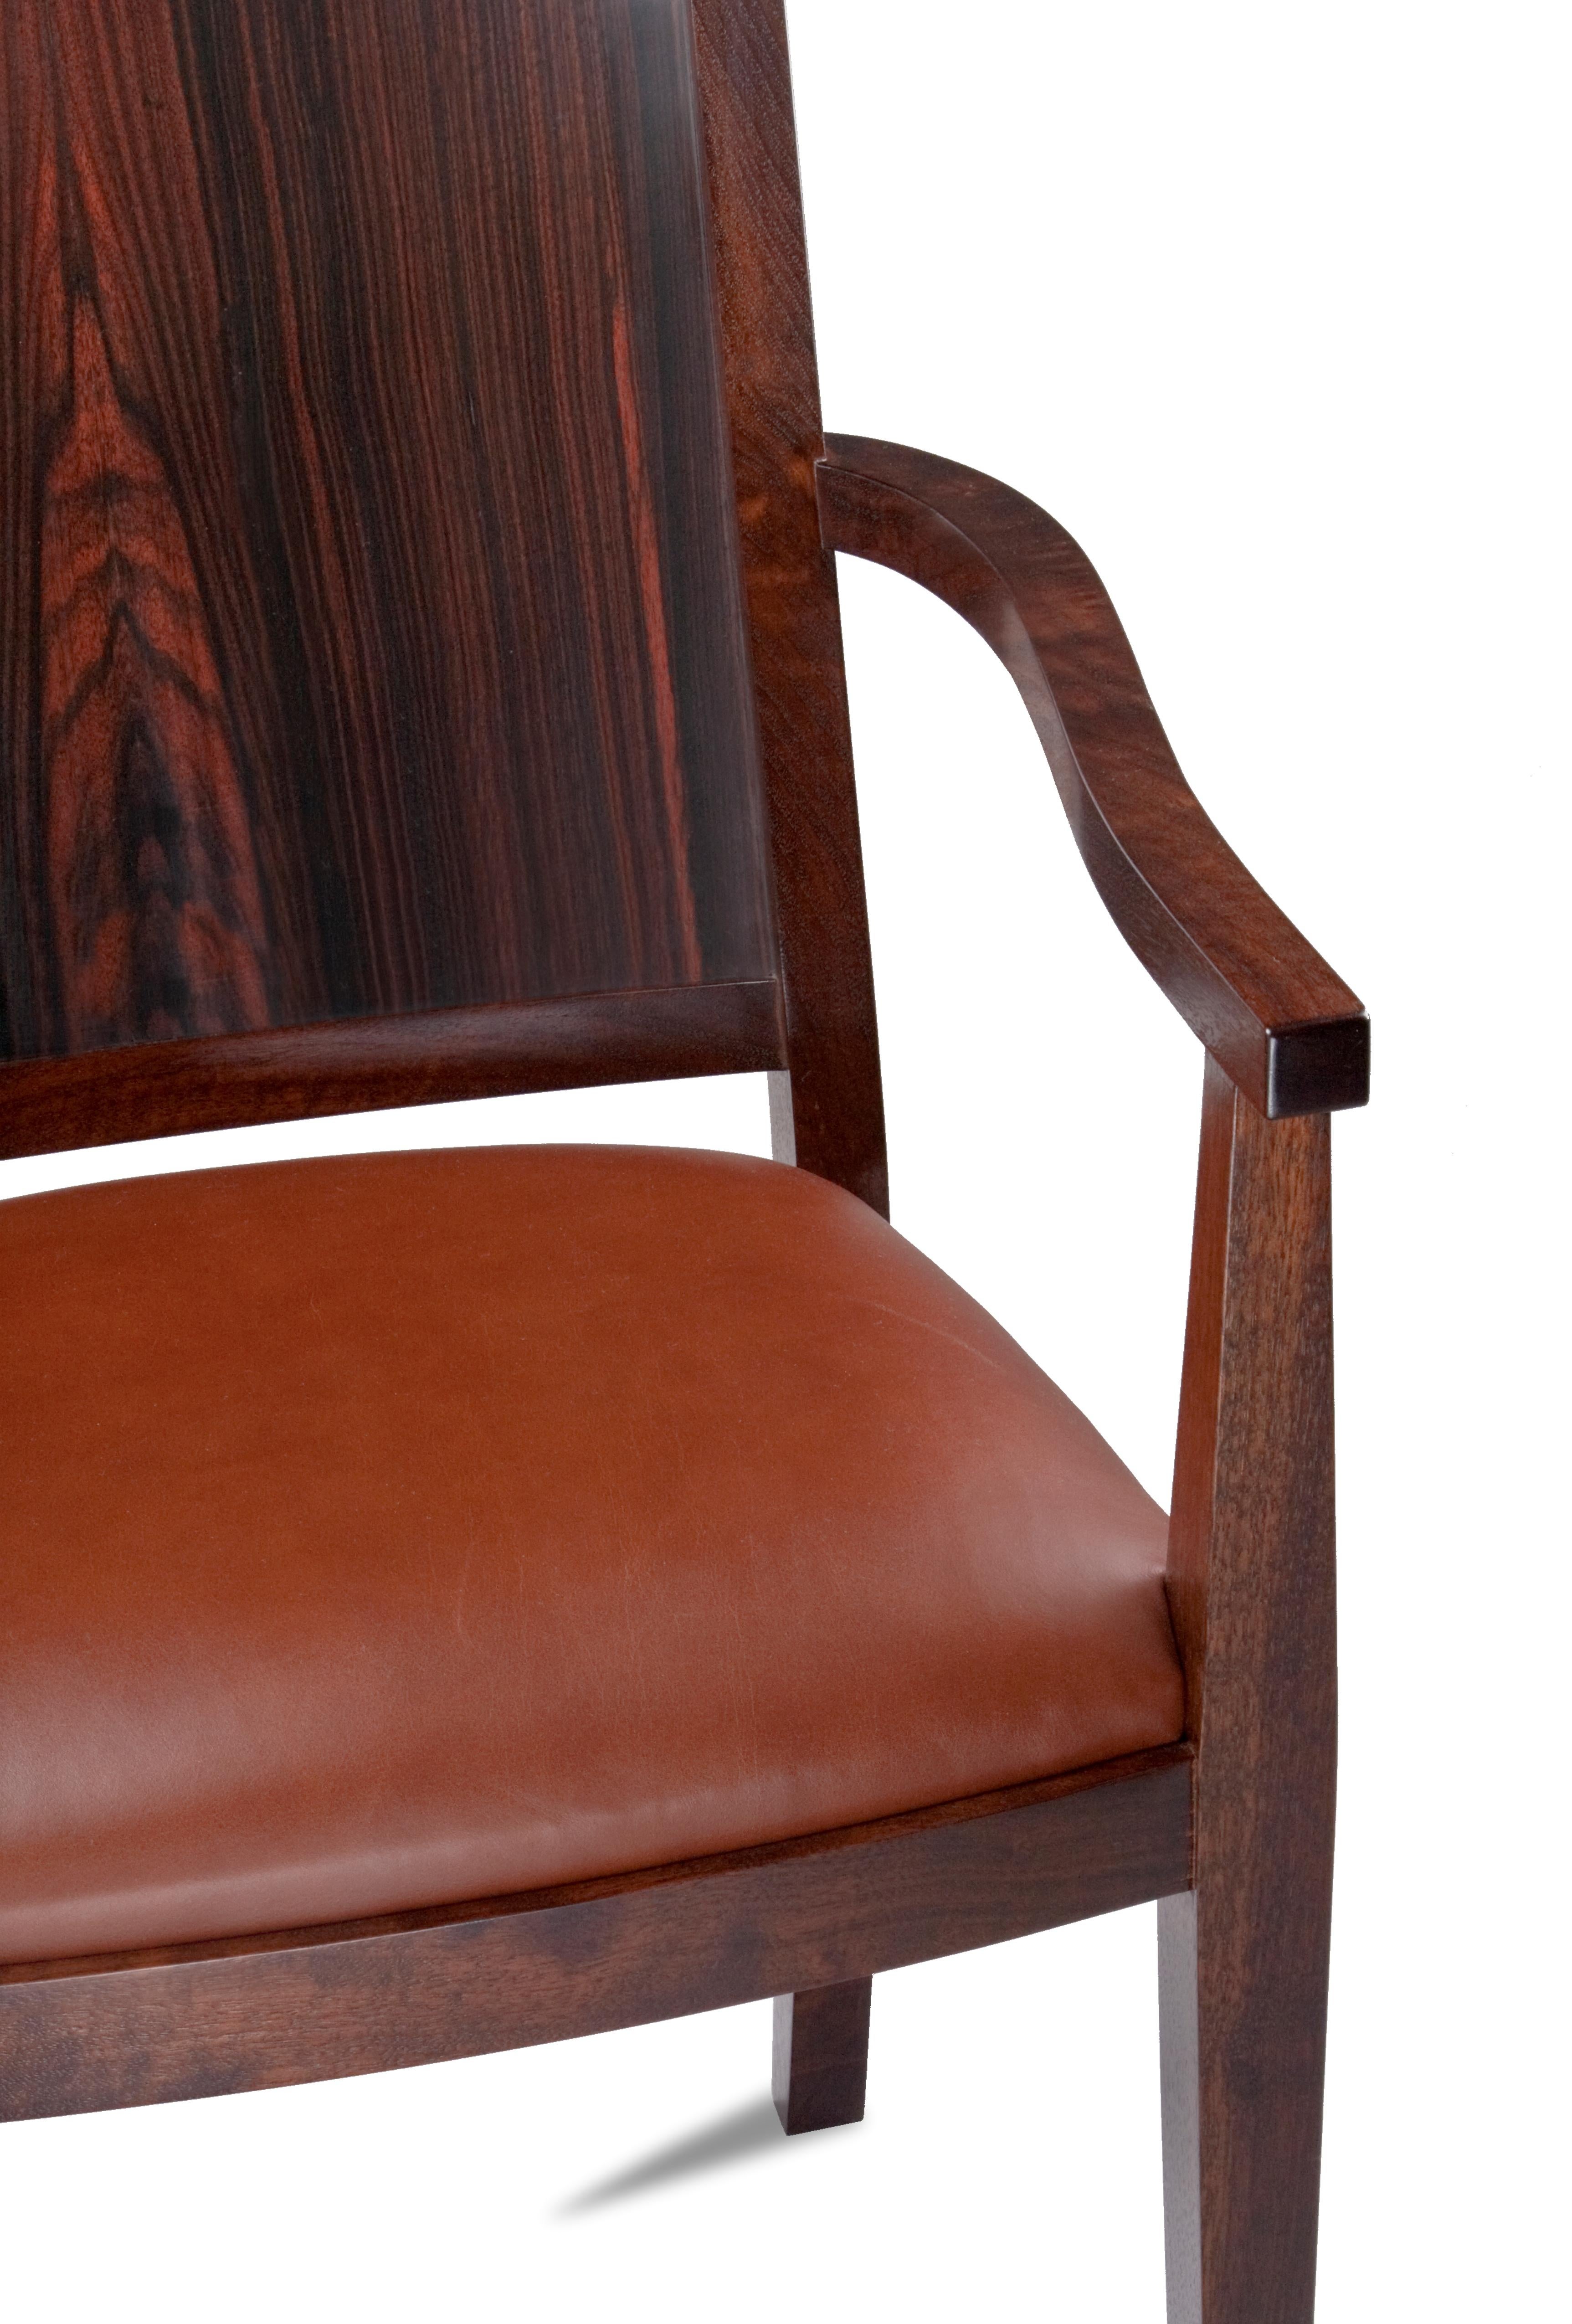 Macassar ebony and walnut dining chairs

Mortise and tenon construction with exotic wood back panel. Clean modern lines with craftsman execution. Comes in arm chair and side chair.
Arm chair $3800
Side chair $3200.